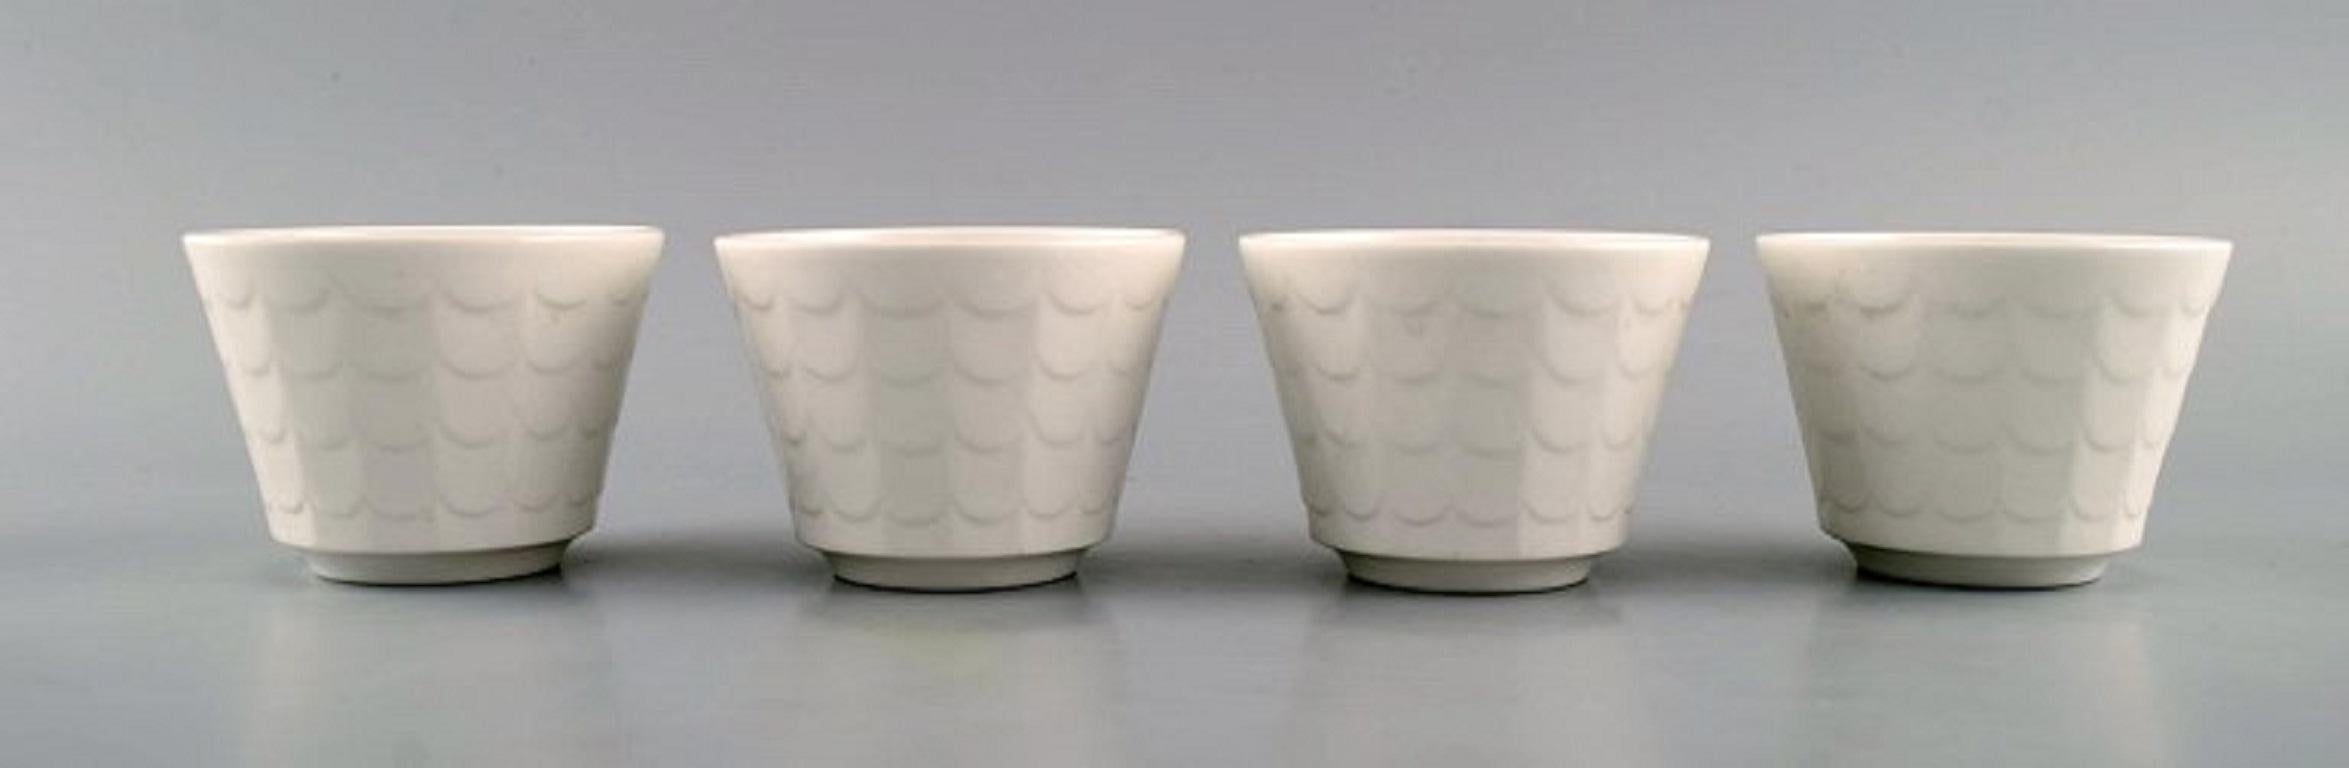 Wilhelm Kåge for Gustavsberg. Four flower pot covers in porcelain. Swedish design, 1960s.
Measures: 8.3 x 6.3 cm.
In excellent condition.
Stamped.